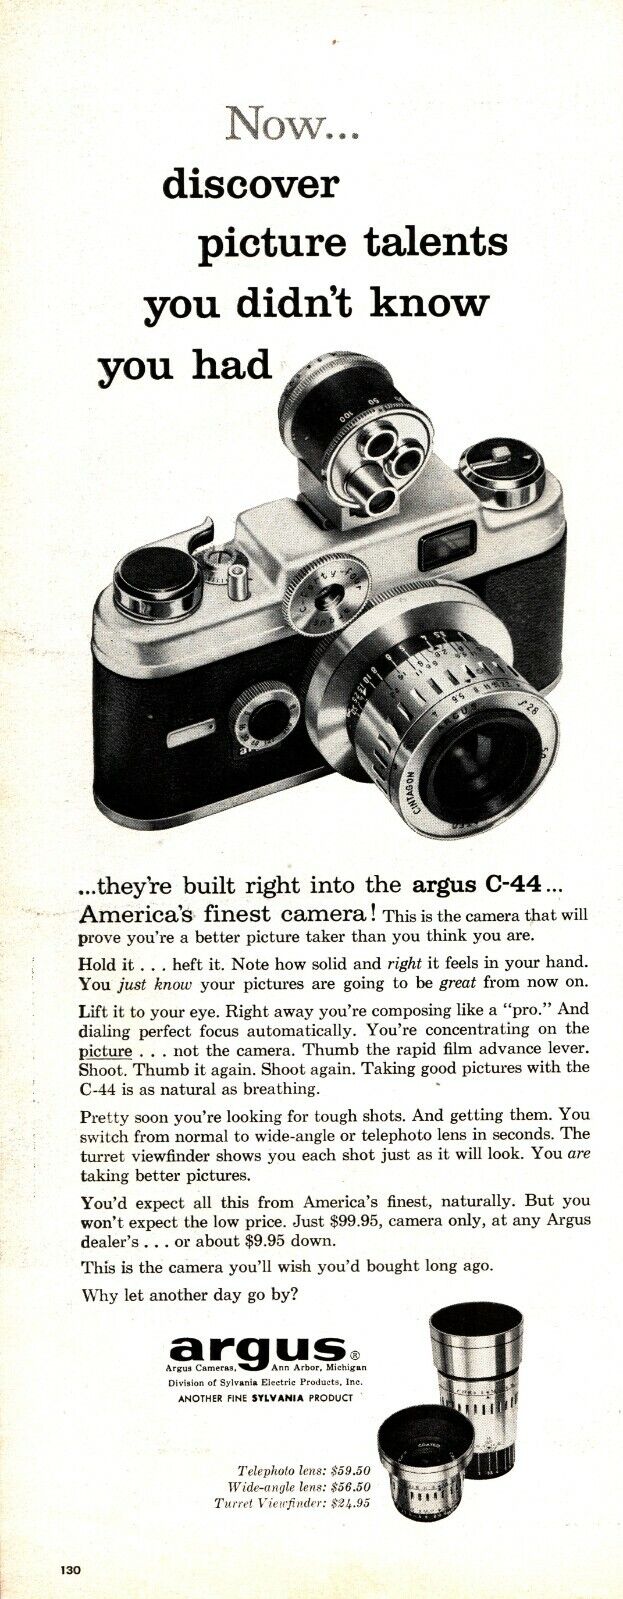 1958 Argus Camera Vintage Print Ad Discover Picture Talents You Didn\'t Know 